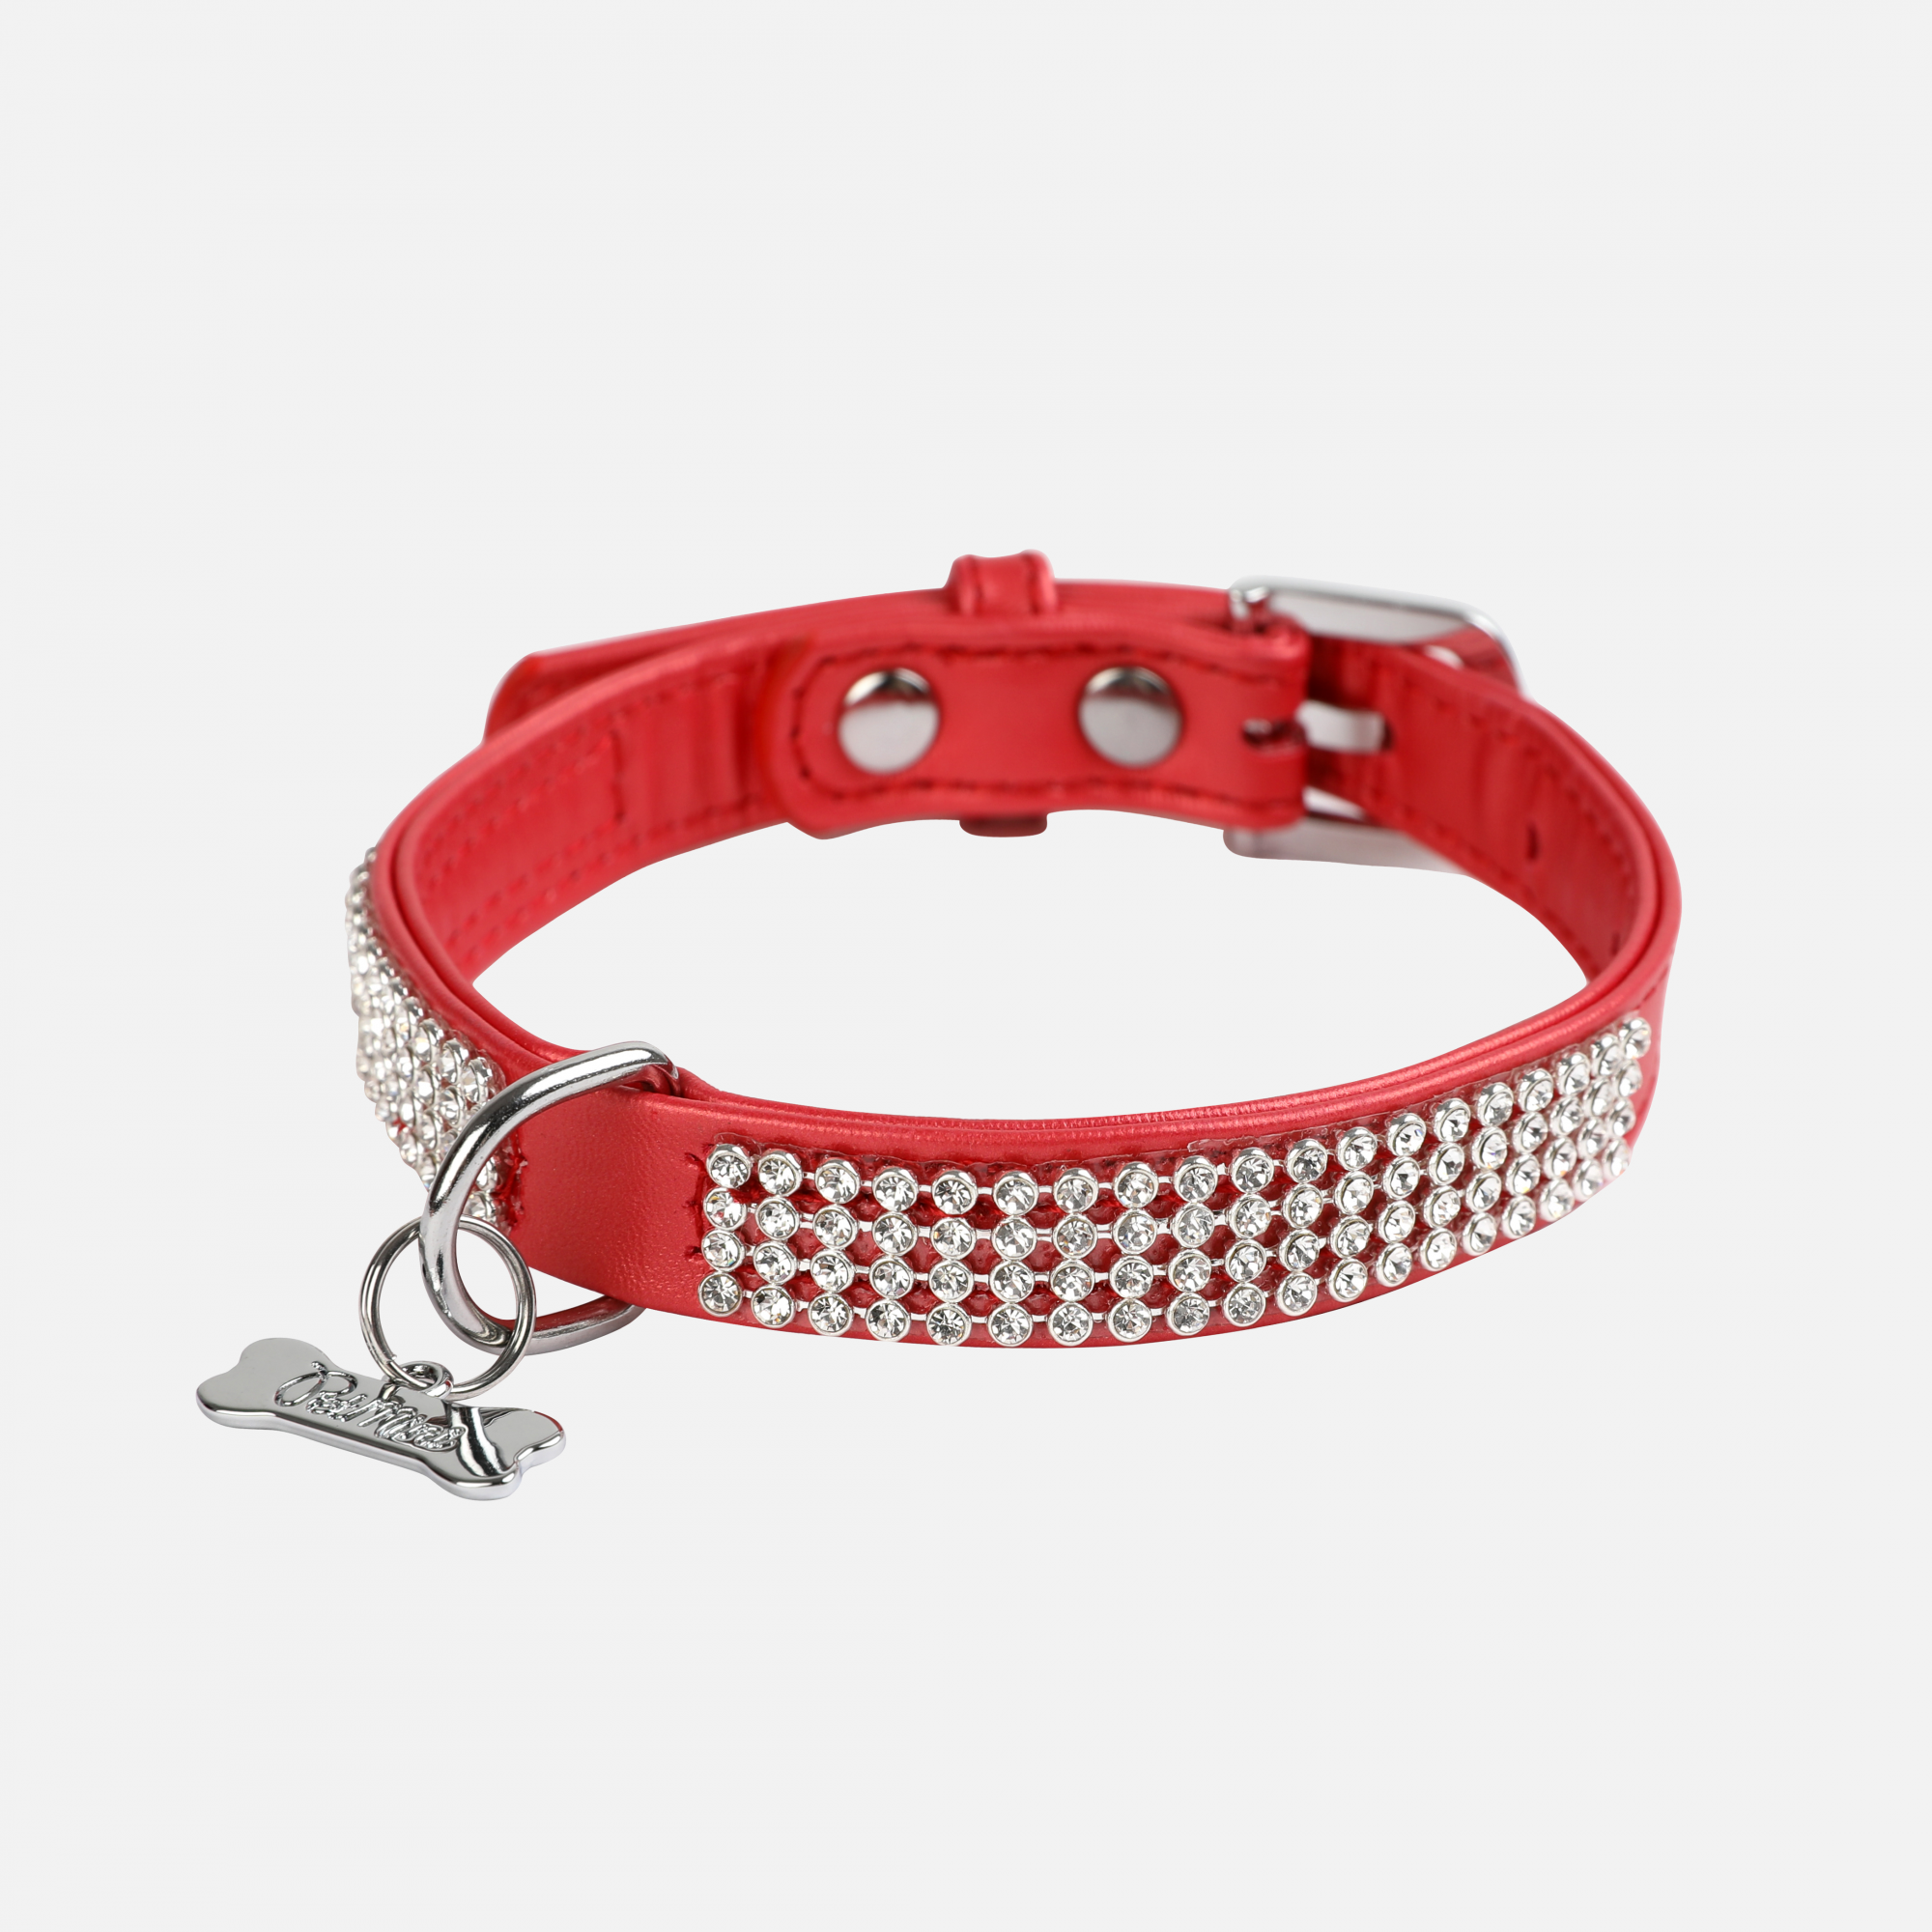 Collier strass rouge chien de wouapy